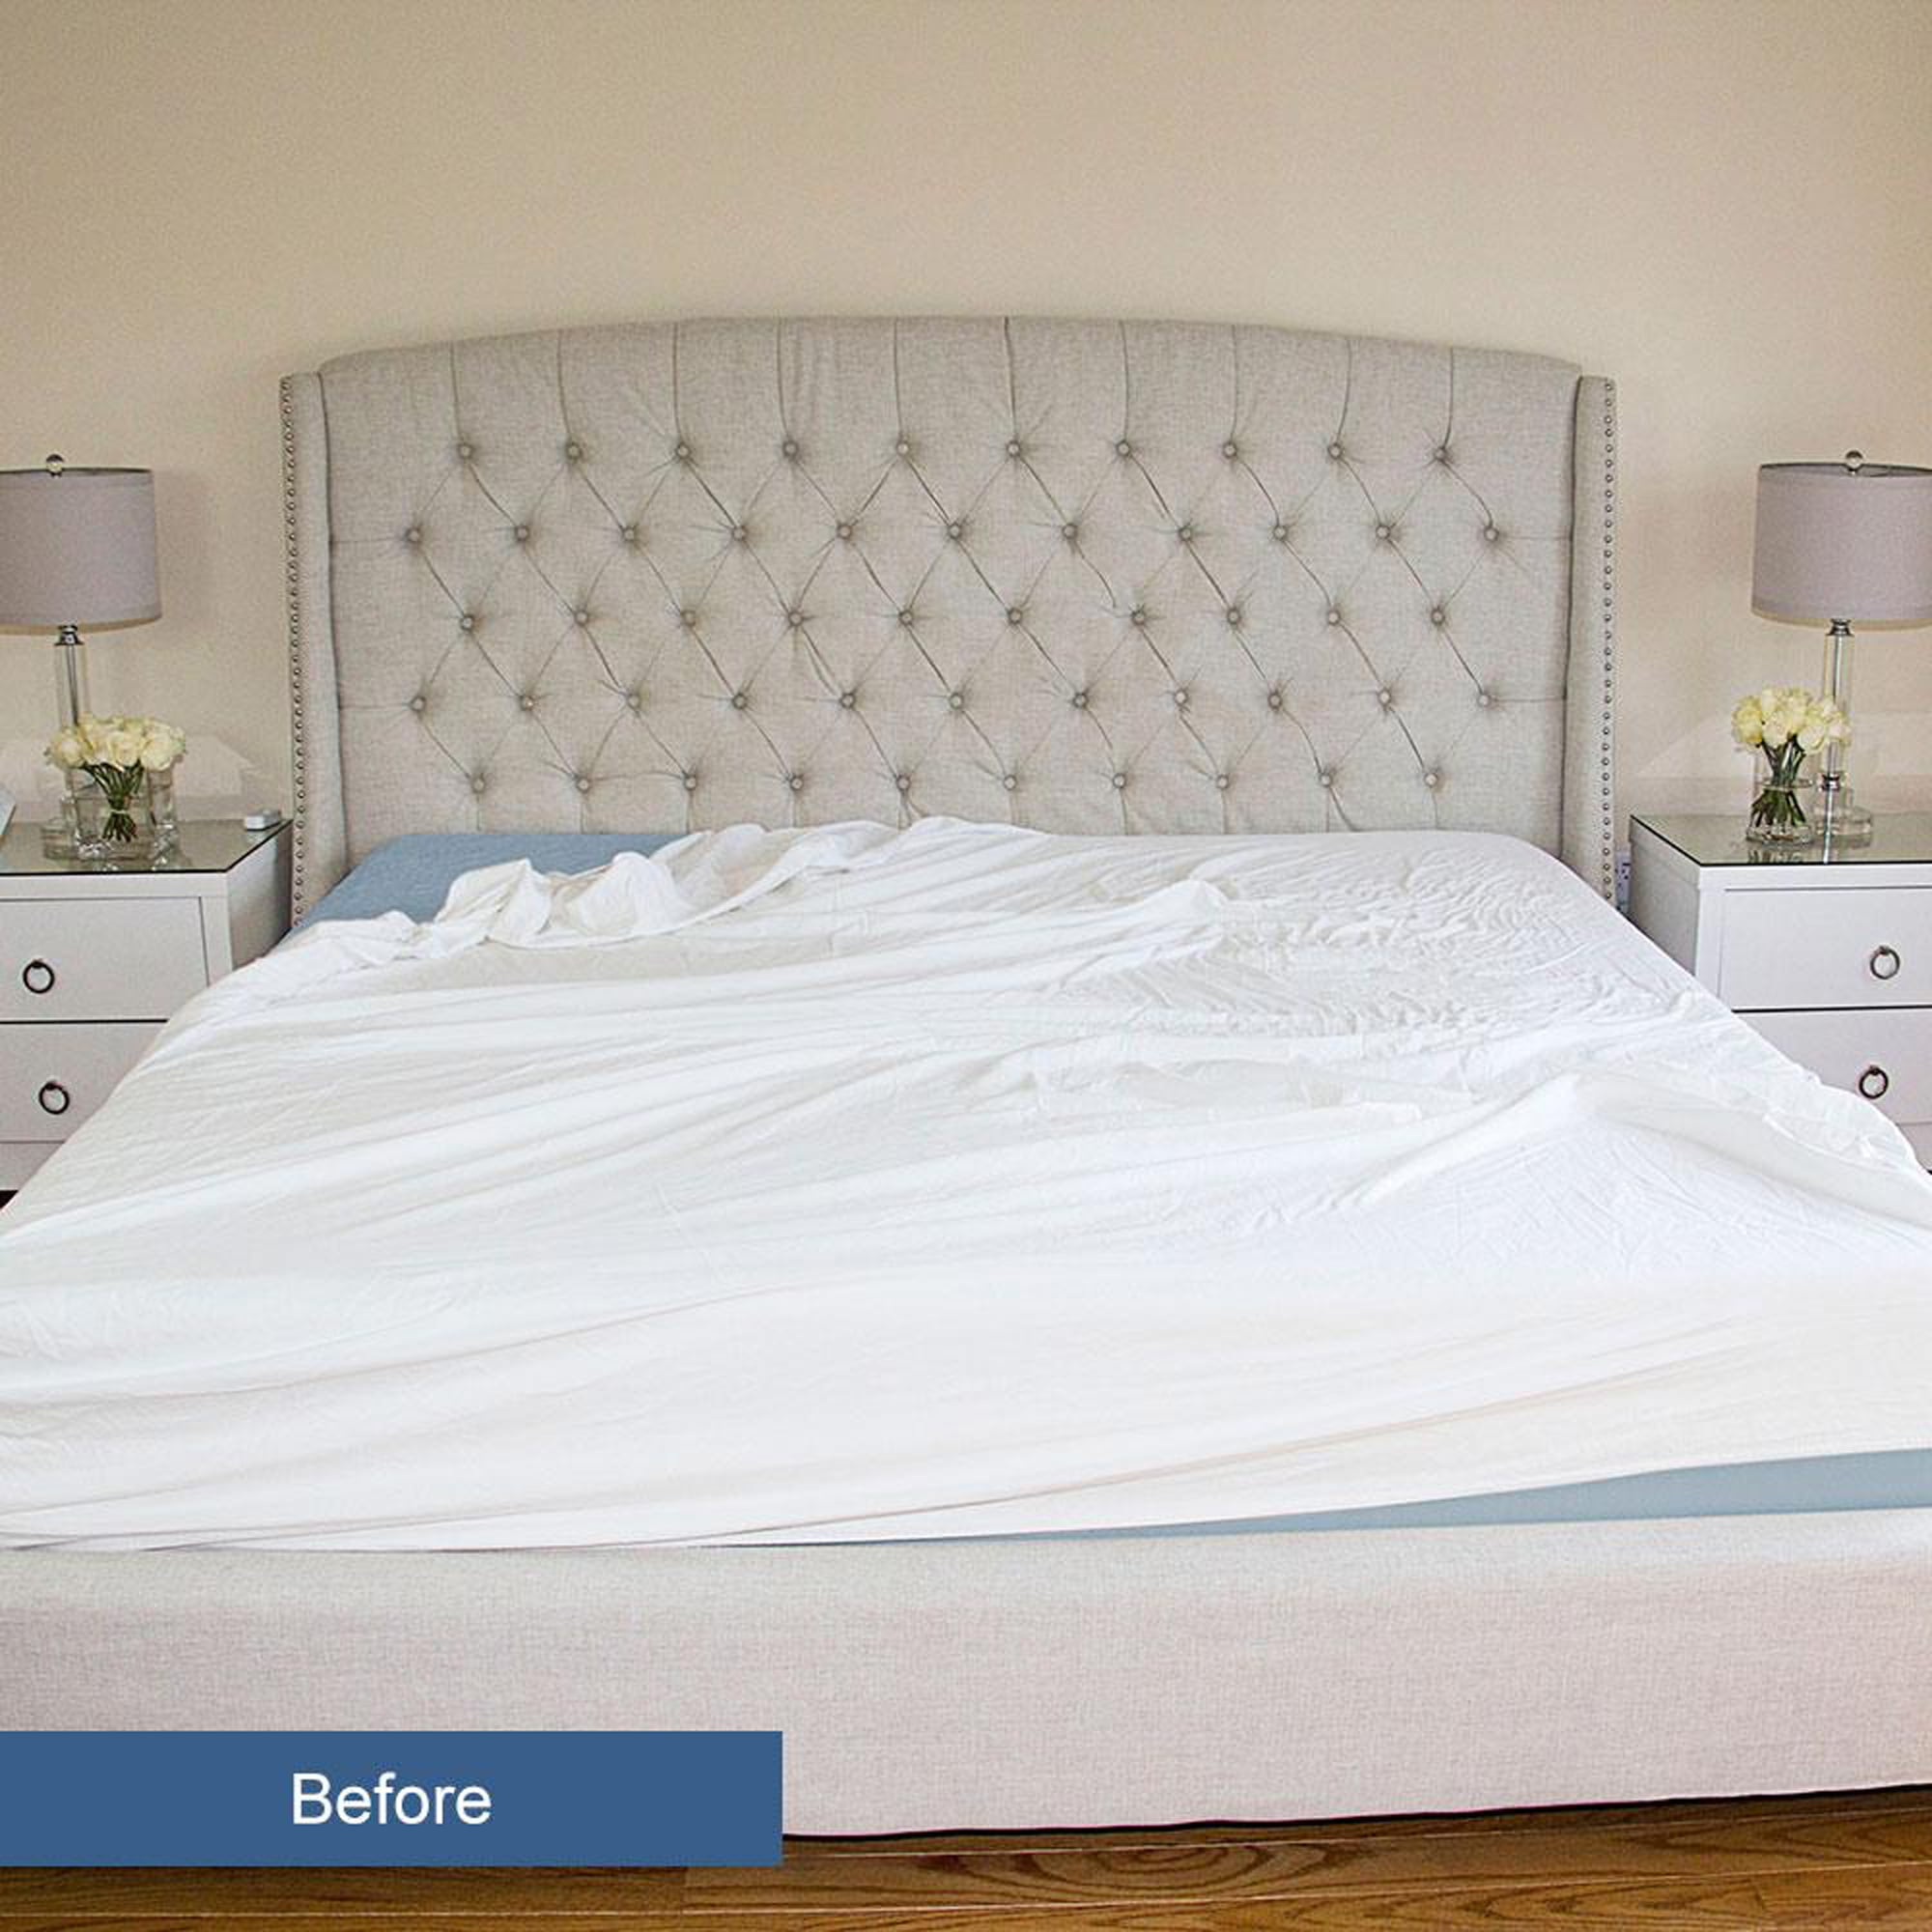 BED SCRUCHIE REVIEW - Decorate with Tip and More